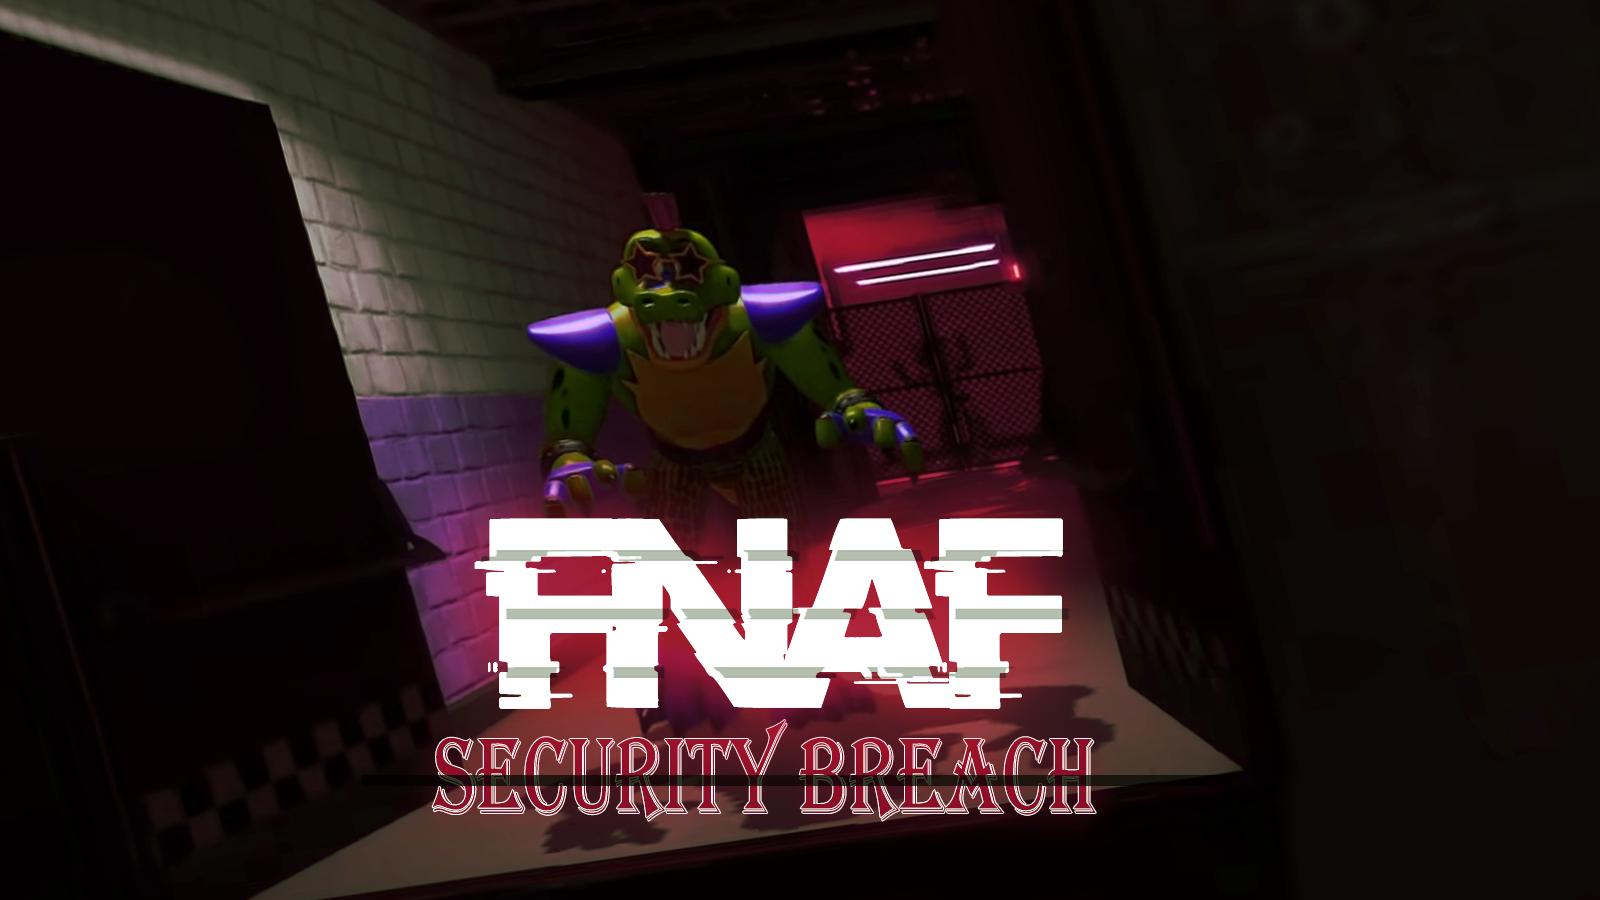 FNAF 9 Security Breach  Android Gameplay 